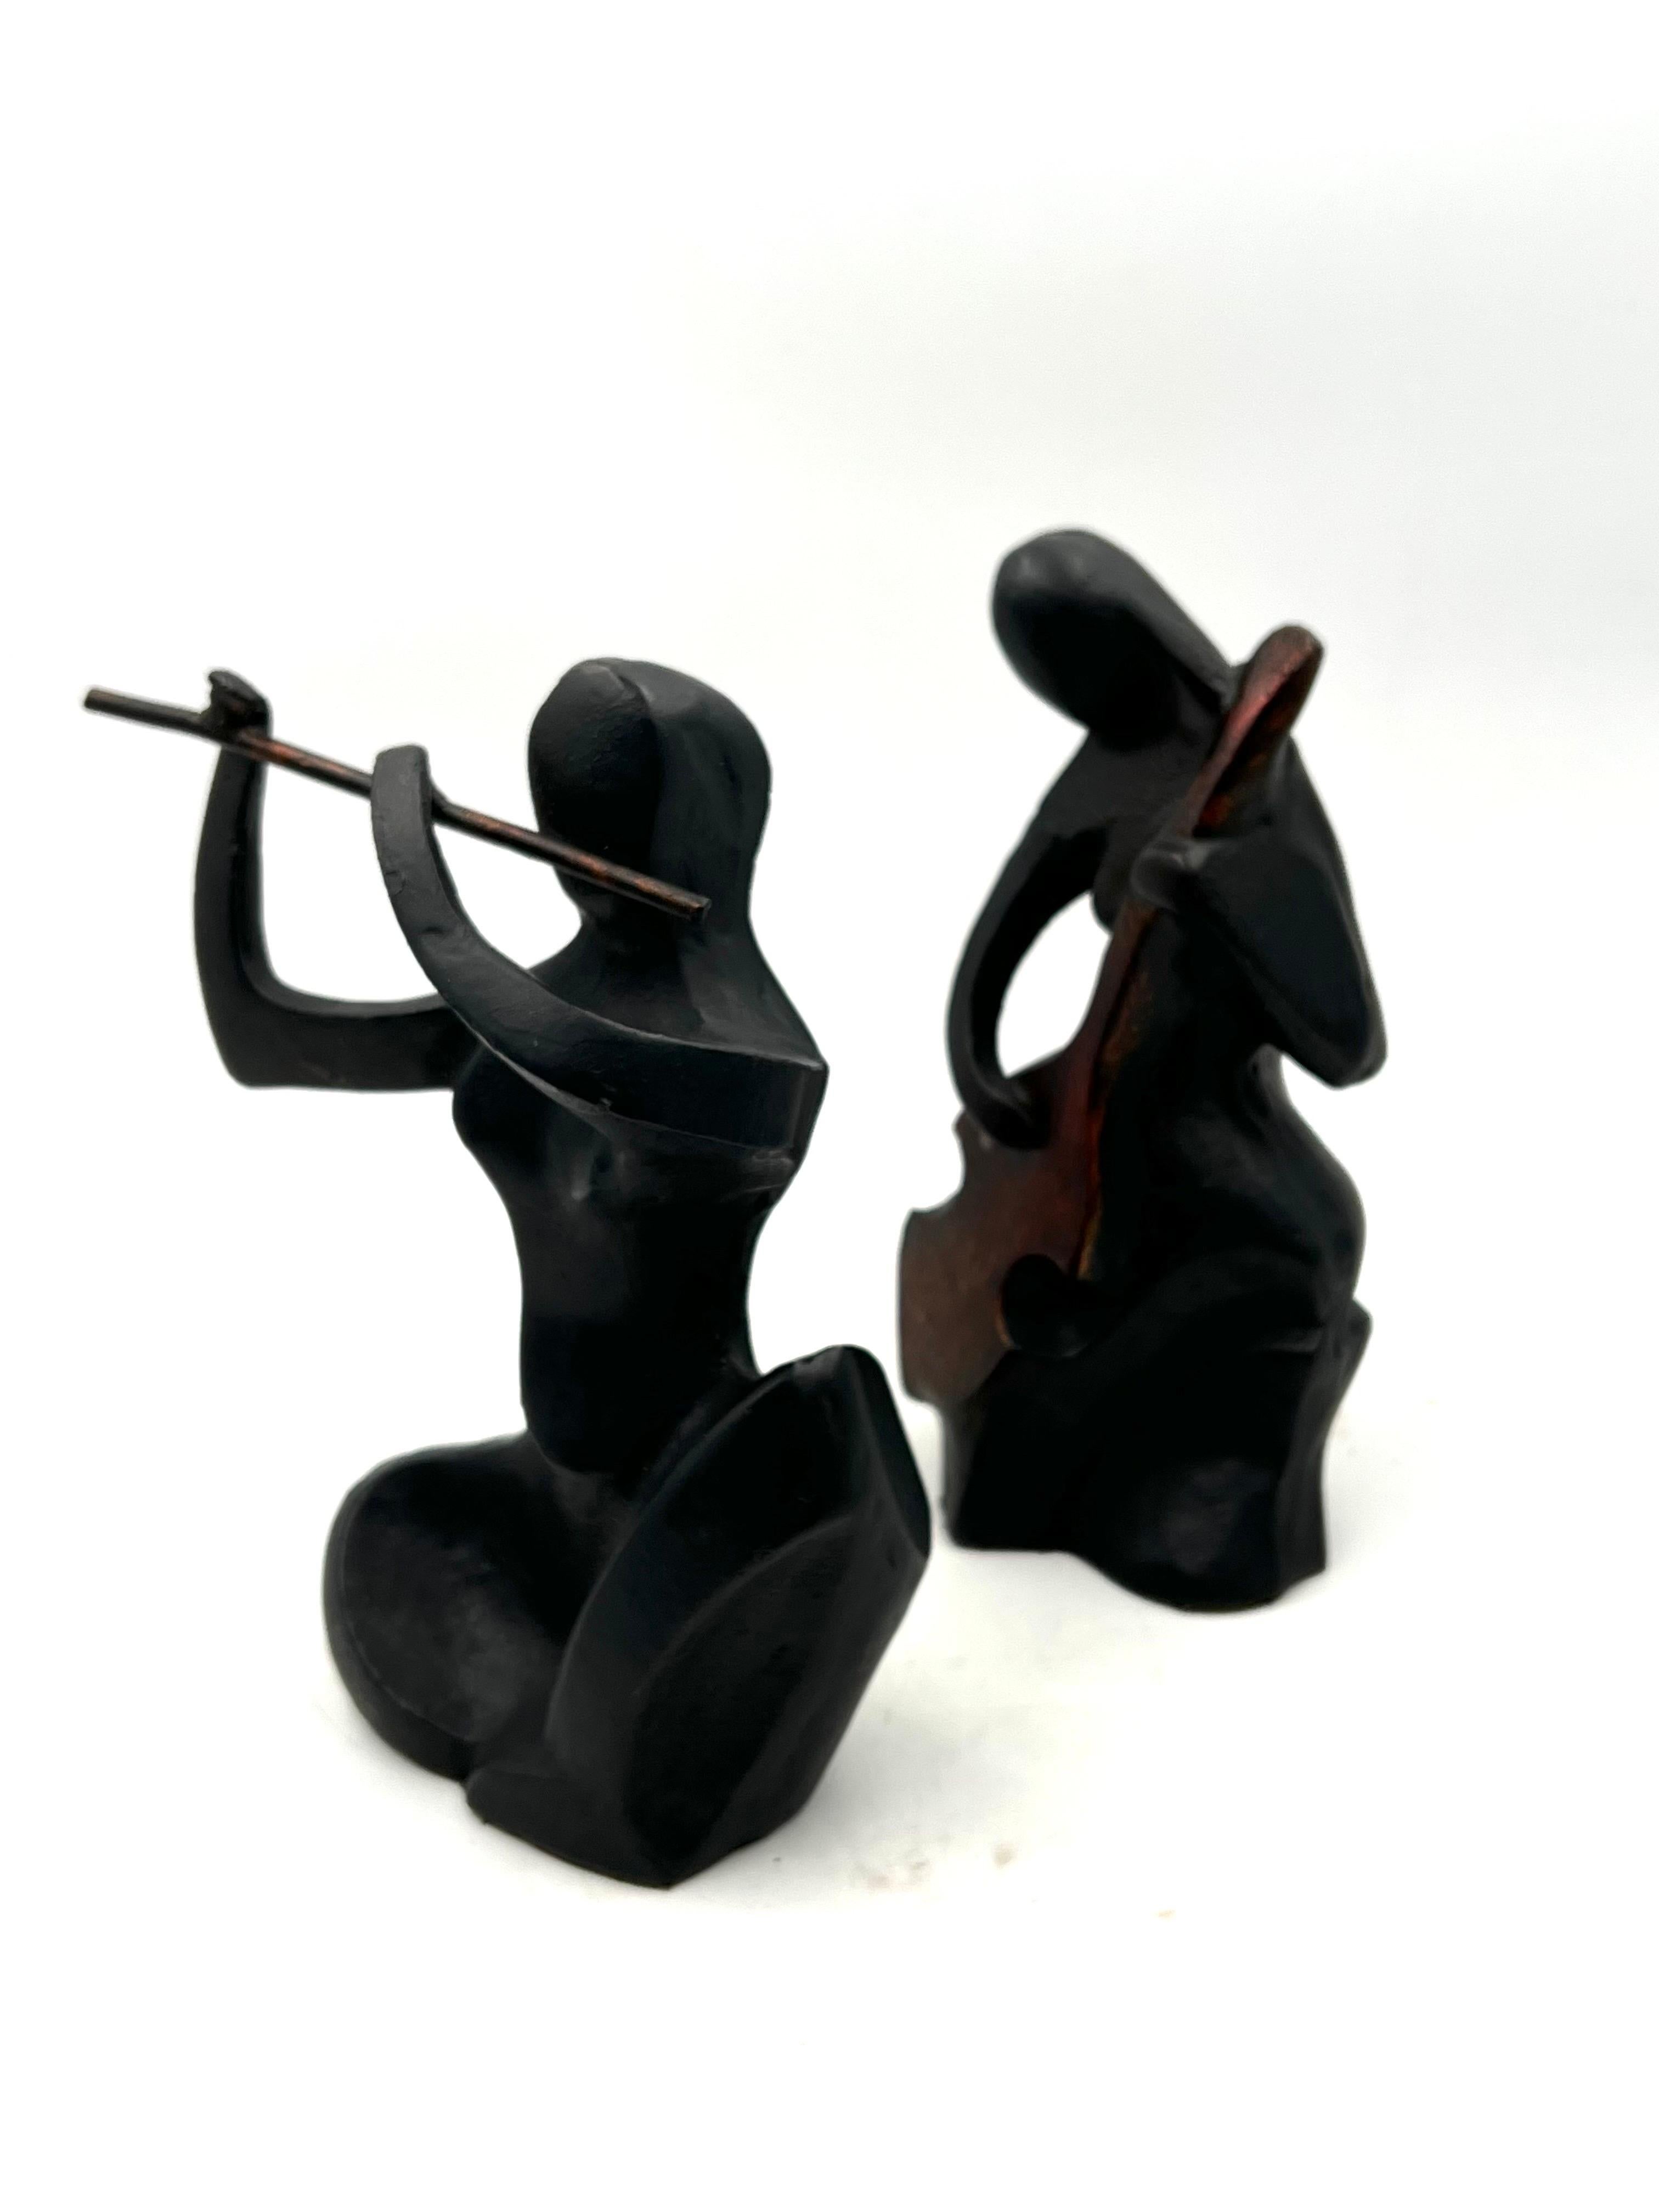 Nice pair of cast iron musicians, men, and woman the pair had a label that read made in Italy but it got lost.